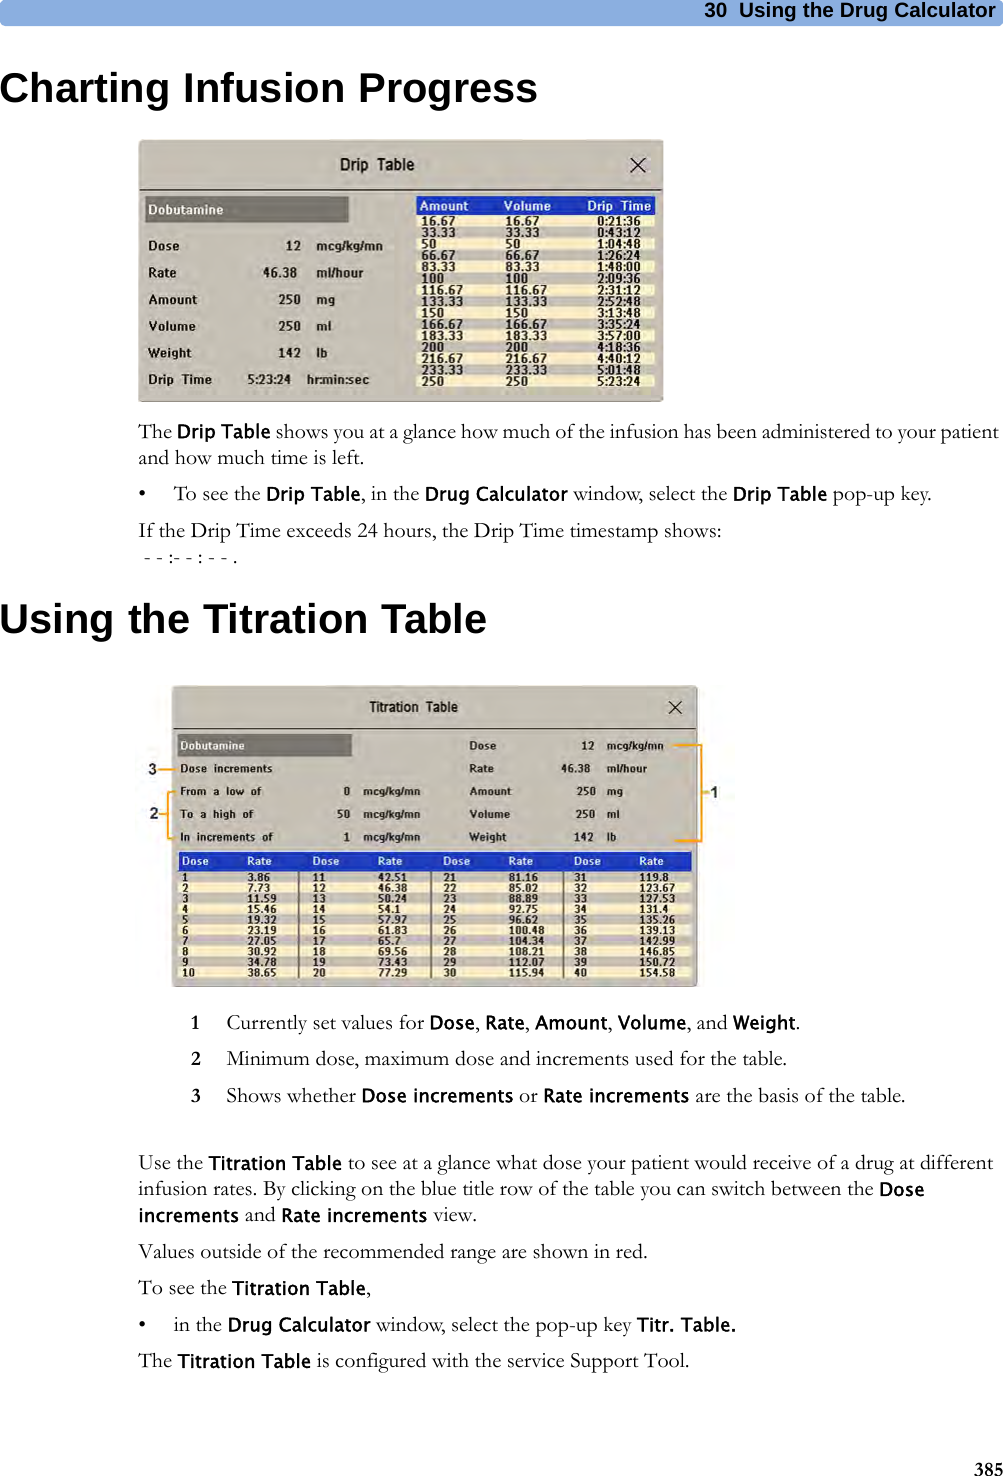 30 Using the Drug Calculator385Charting Infusion ProgressThe Drip Table shows you at a glance how much of the infusion has been administered to your patient and how much time is left.• To see the Drip Table, in the Drug Calculator window, select the Drip Table pop-up key.If the Drip Time exceeds 24 hours, the Drip Time timestamp shows: - - :- - : - - .Using the Titration TableUse the Titration Table to see at a glance what dose your patient would receive of a drug at different infusion rates. By clicking on the blue title row of the table you can switch between the Dose increments and Rate increments view.Values outside of the recommended range are shown in red.To see the Titration Table,•in the Drug Calculator window, select the pop-up key Titr. Table.The Titration Table is configured with the service Support Tool.1Currently set values for Dose, Rate, Amount, Volume, and Weight.2Minimum dose, maximum dose and increments used for the table.3Shows whether Dose increments or Rate increments are the basis of the table.